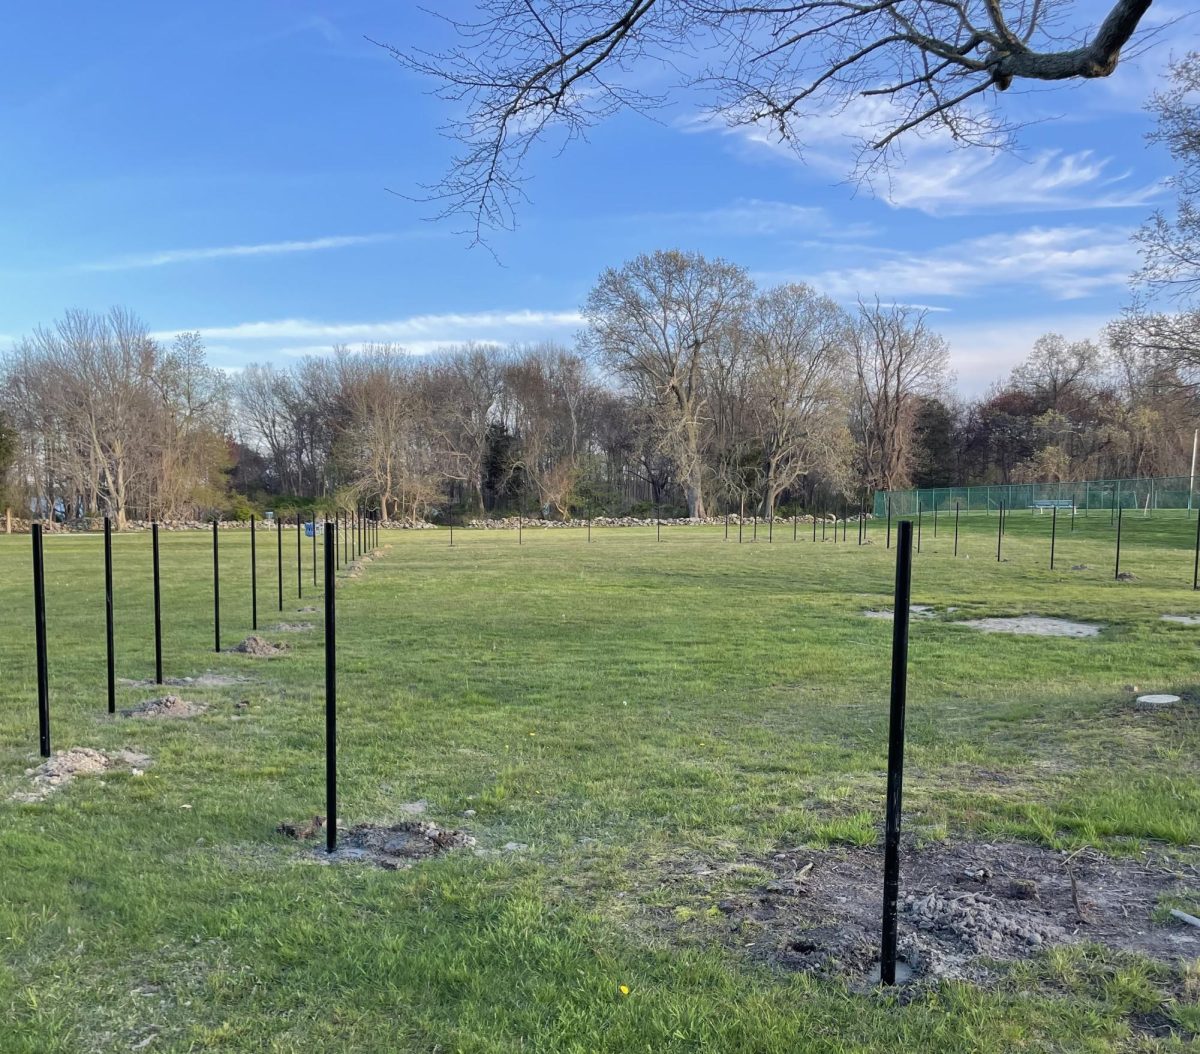 The finalizing of the process of building a dog park on campus that will be open to both students and faculty in the Fall of 2024.